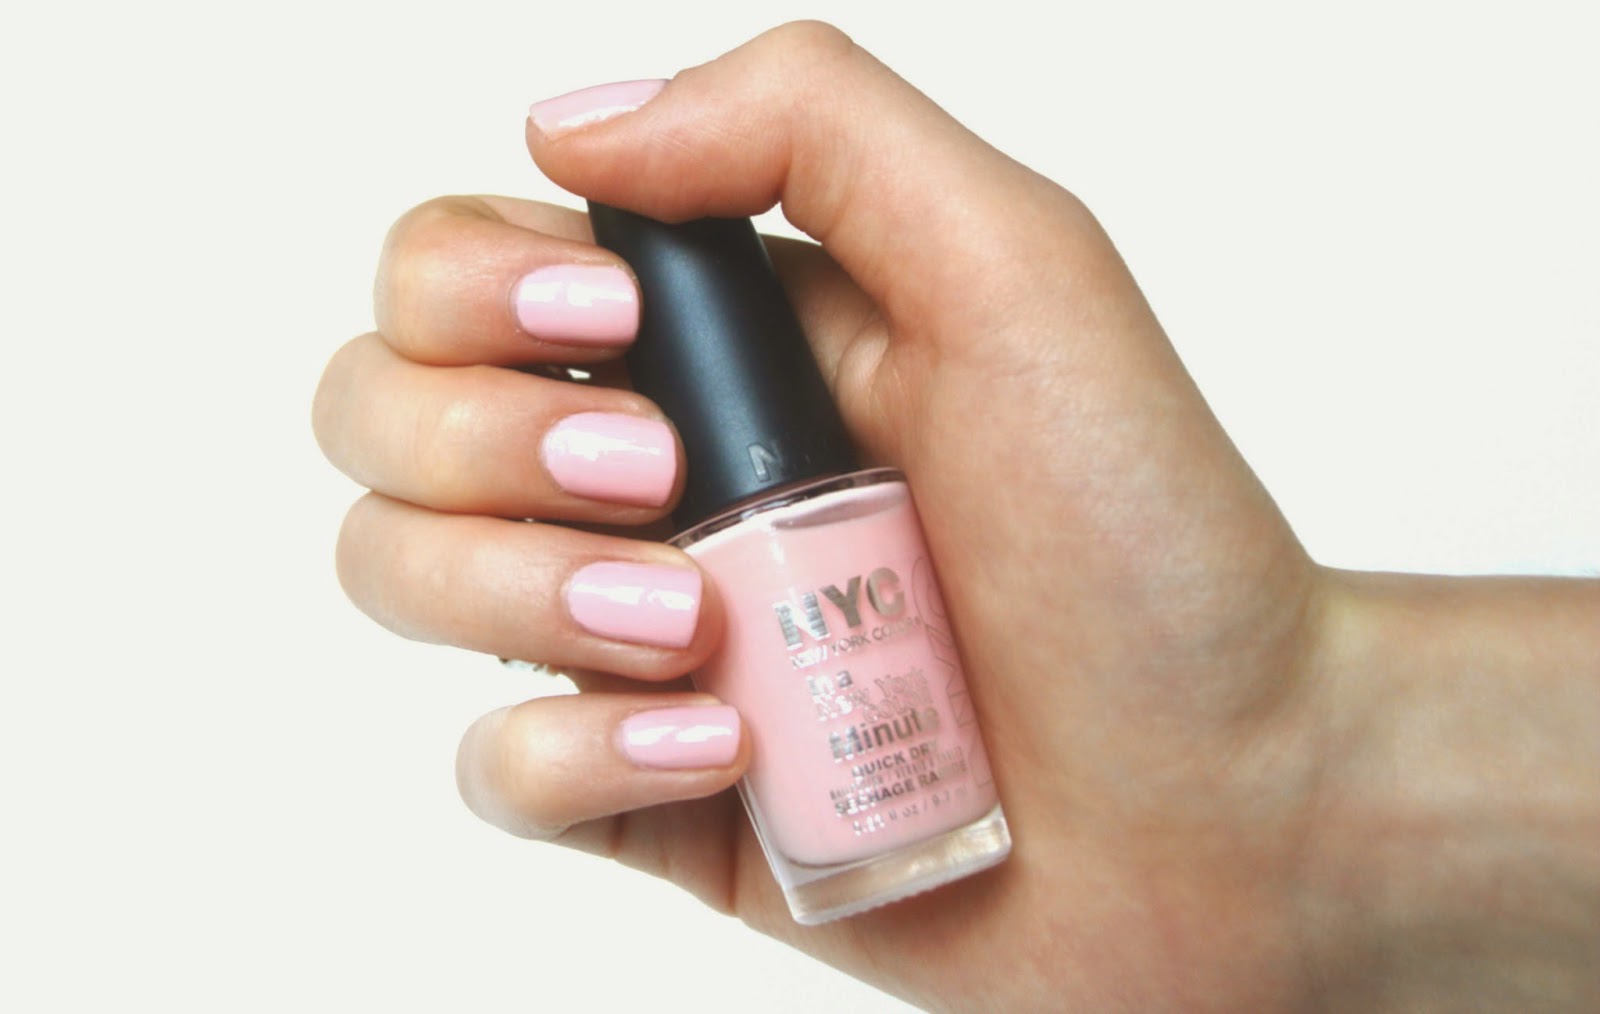 NYC New York Color Quick Dry Nail Enamel - wide 8